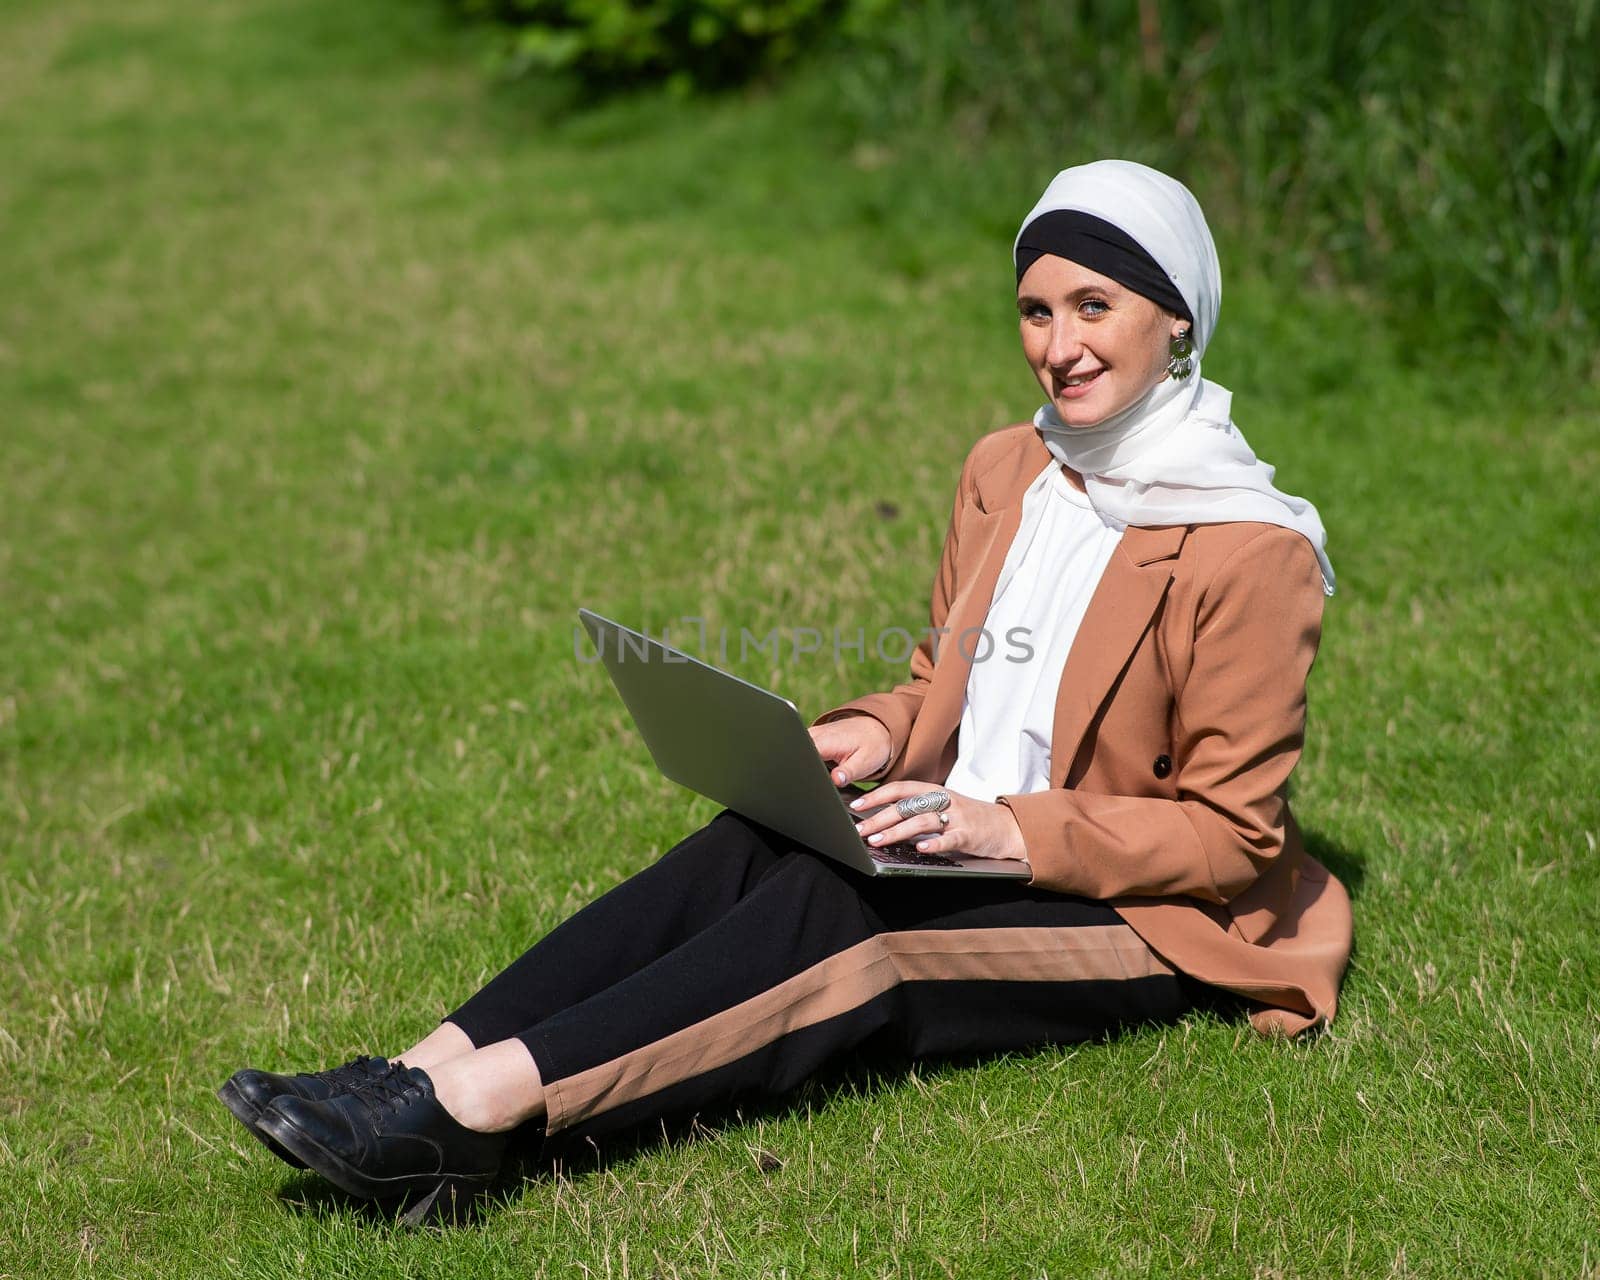 A young woman wearing a hijab sits on a lawn and uses a laptop outdoors. by mrwed54